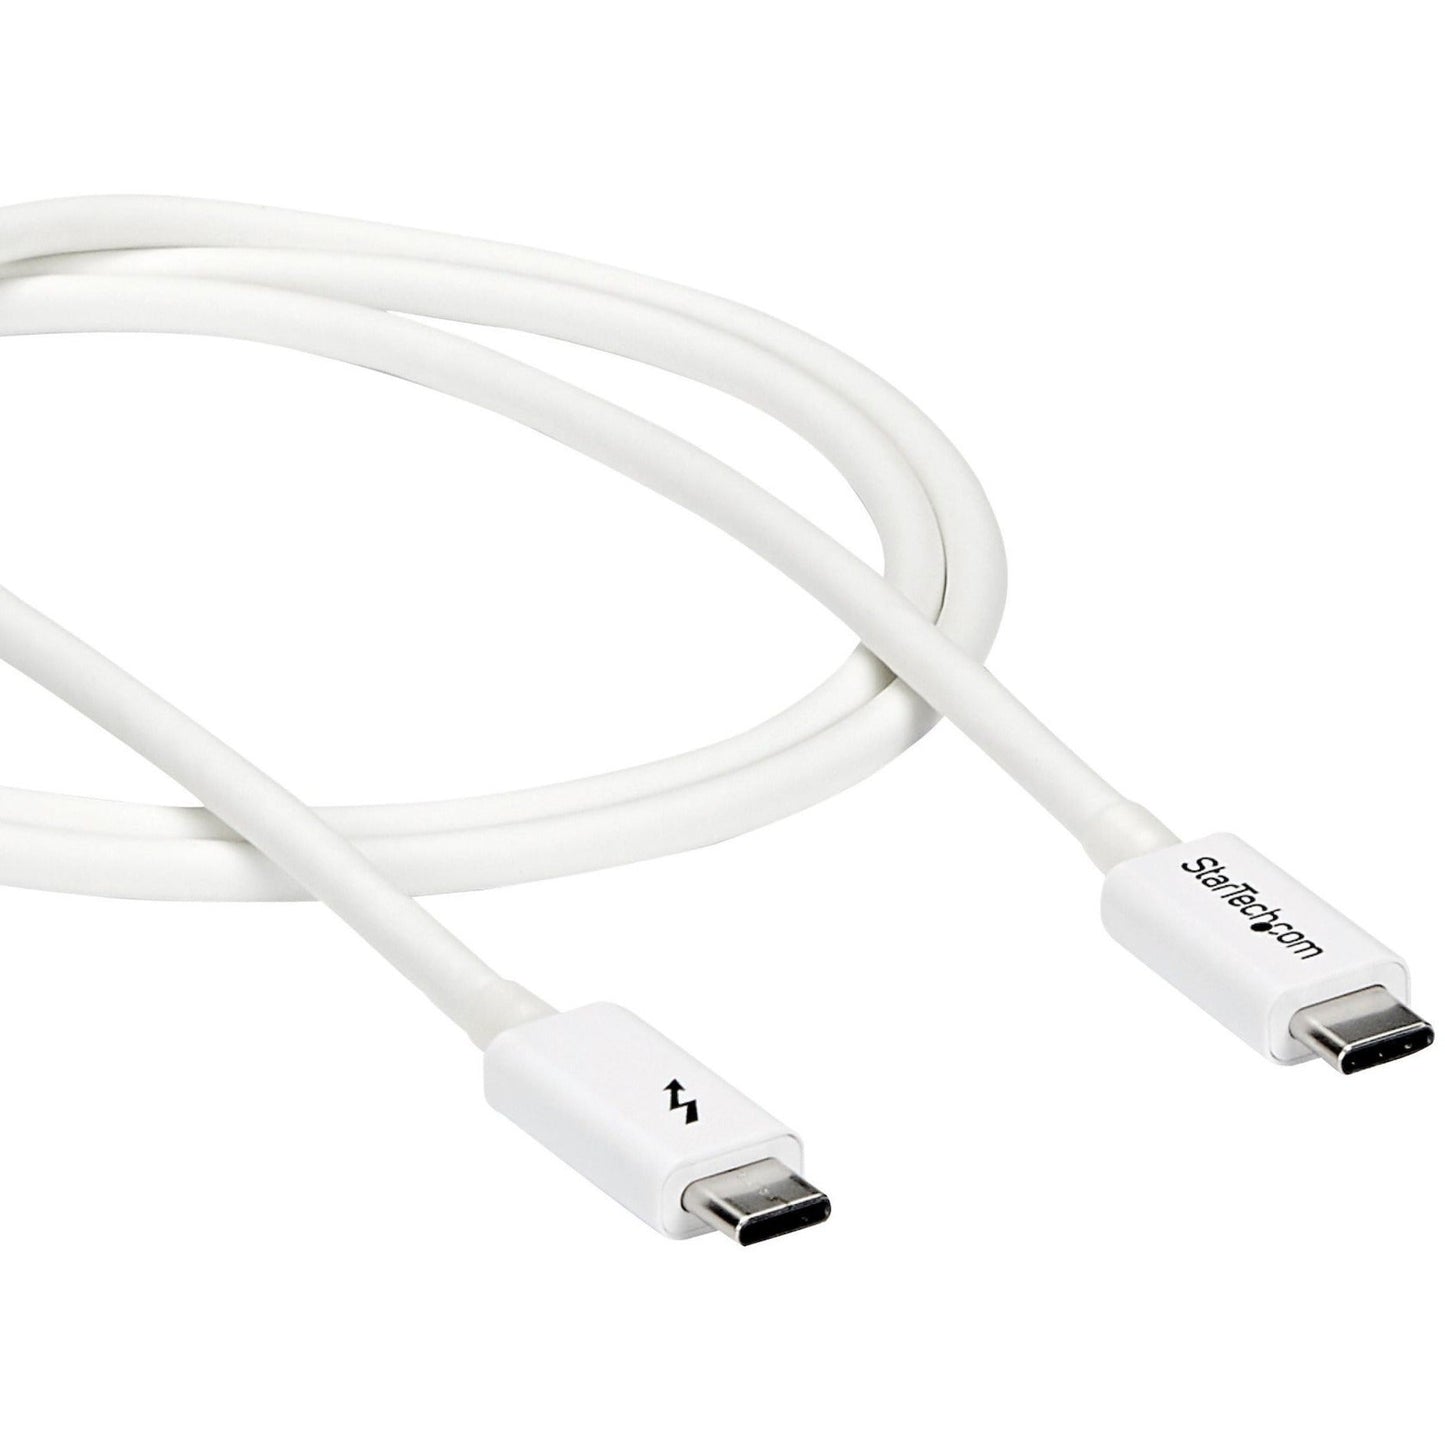 StarTech.com 1m Thunderbolt 3 Cable - 20Gbps - White - Thunderbolt / USB-C / DisplayPort Compatible - Thunderbolt 3 USB-C Cable